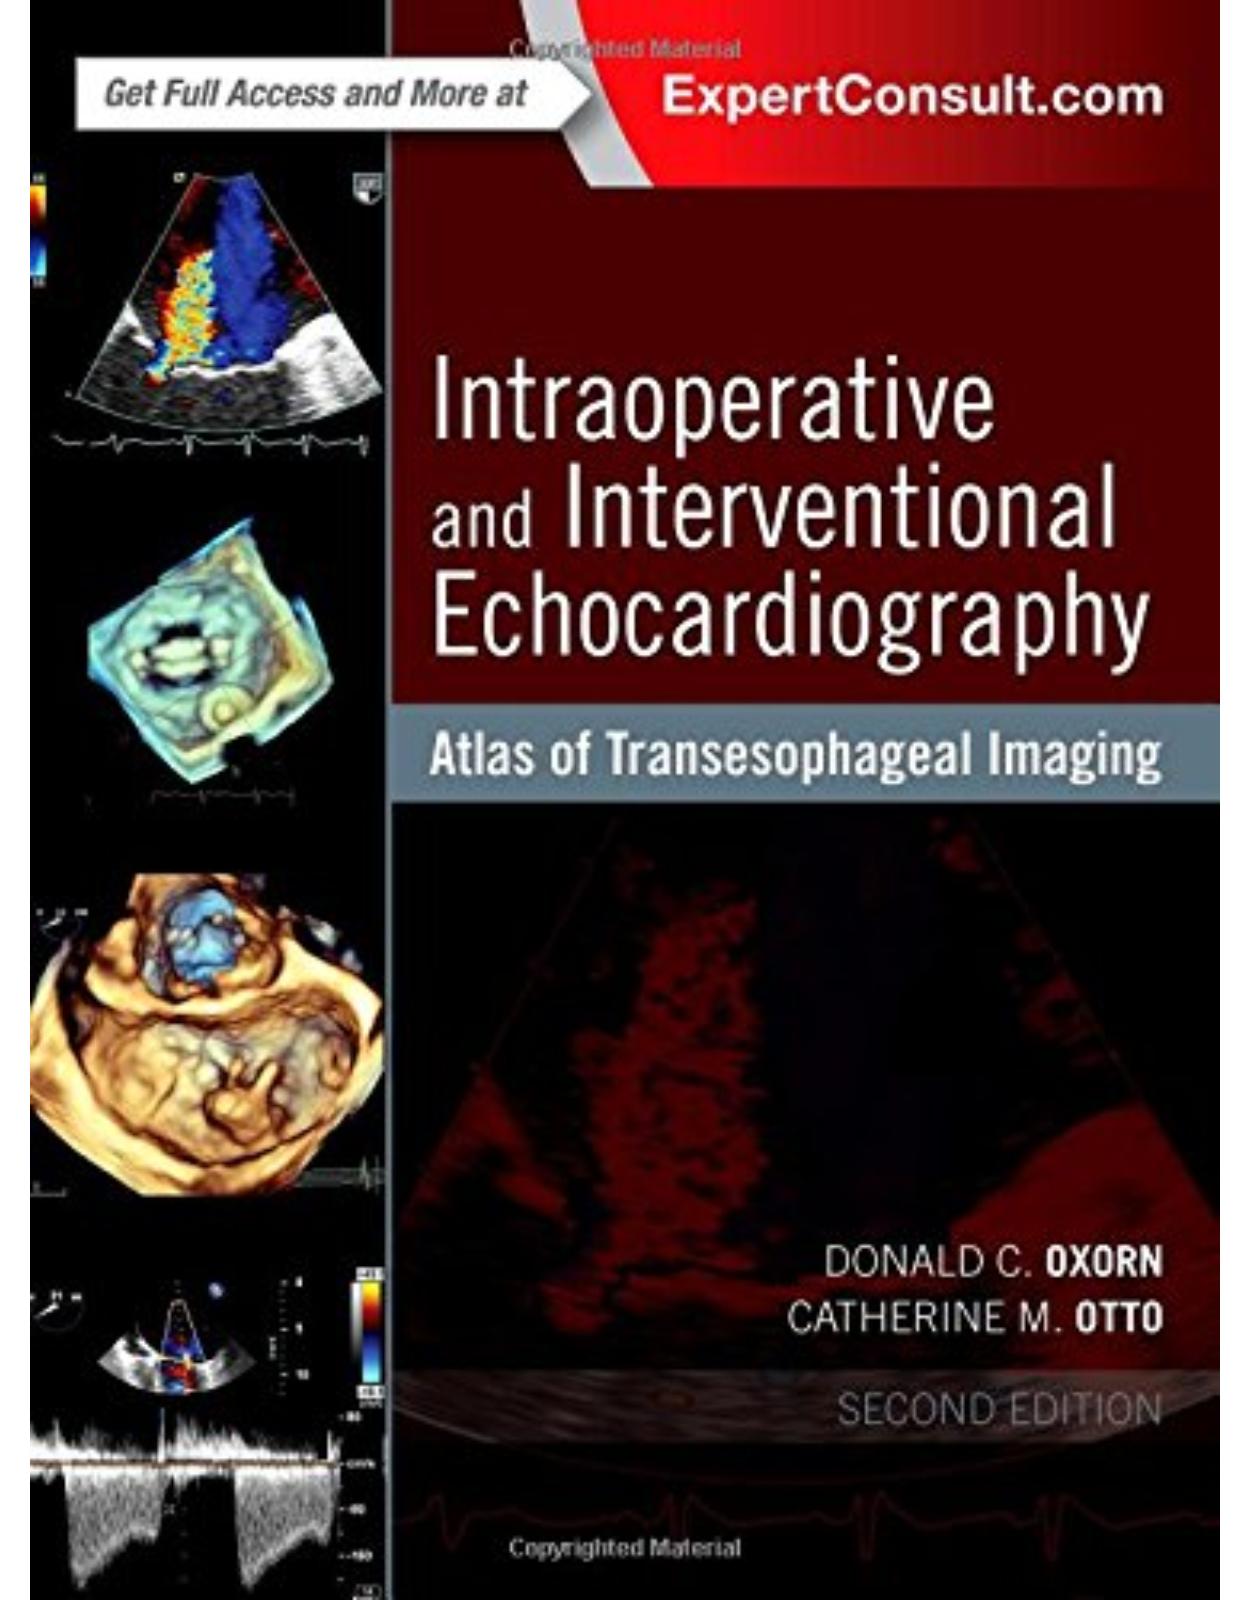 Intraoperative and Interventional Echocardiography: Atlas of Transesophageal Imaging, 2e 